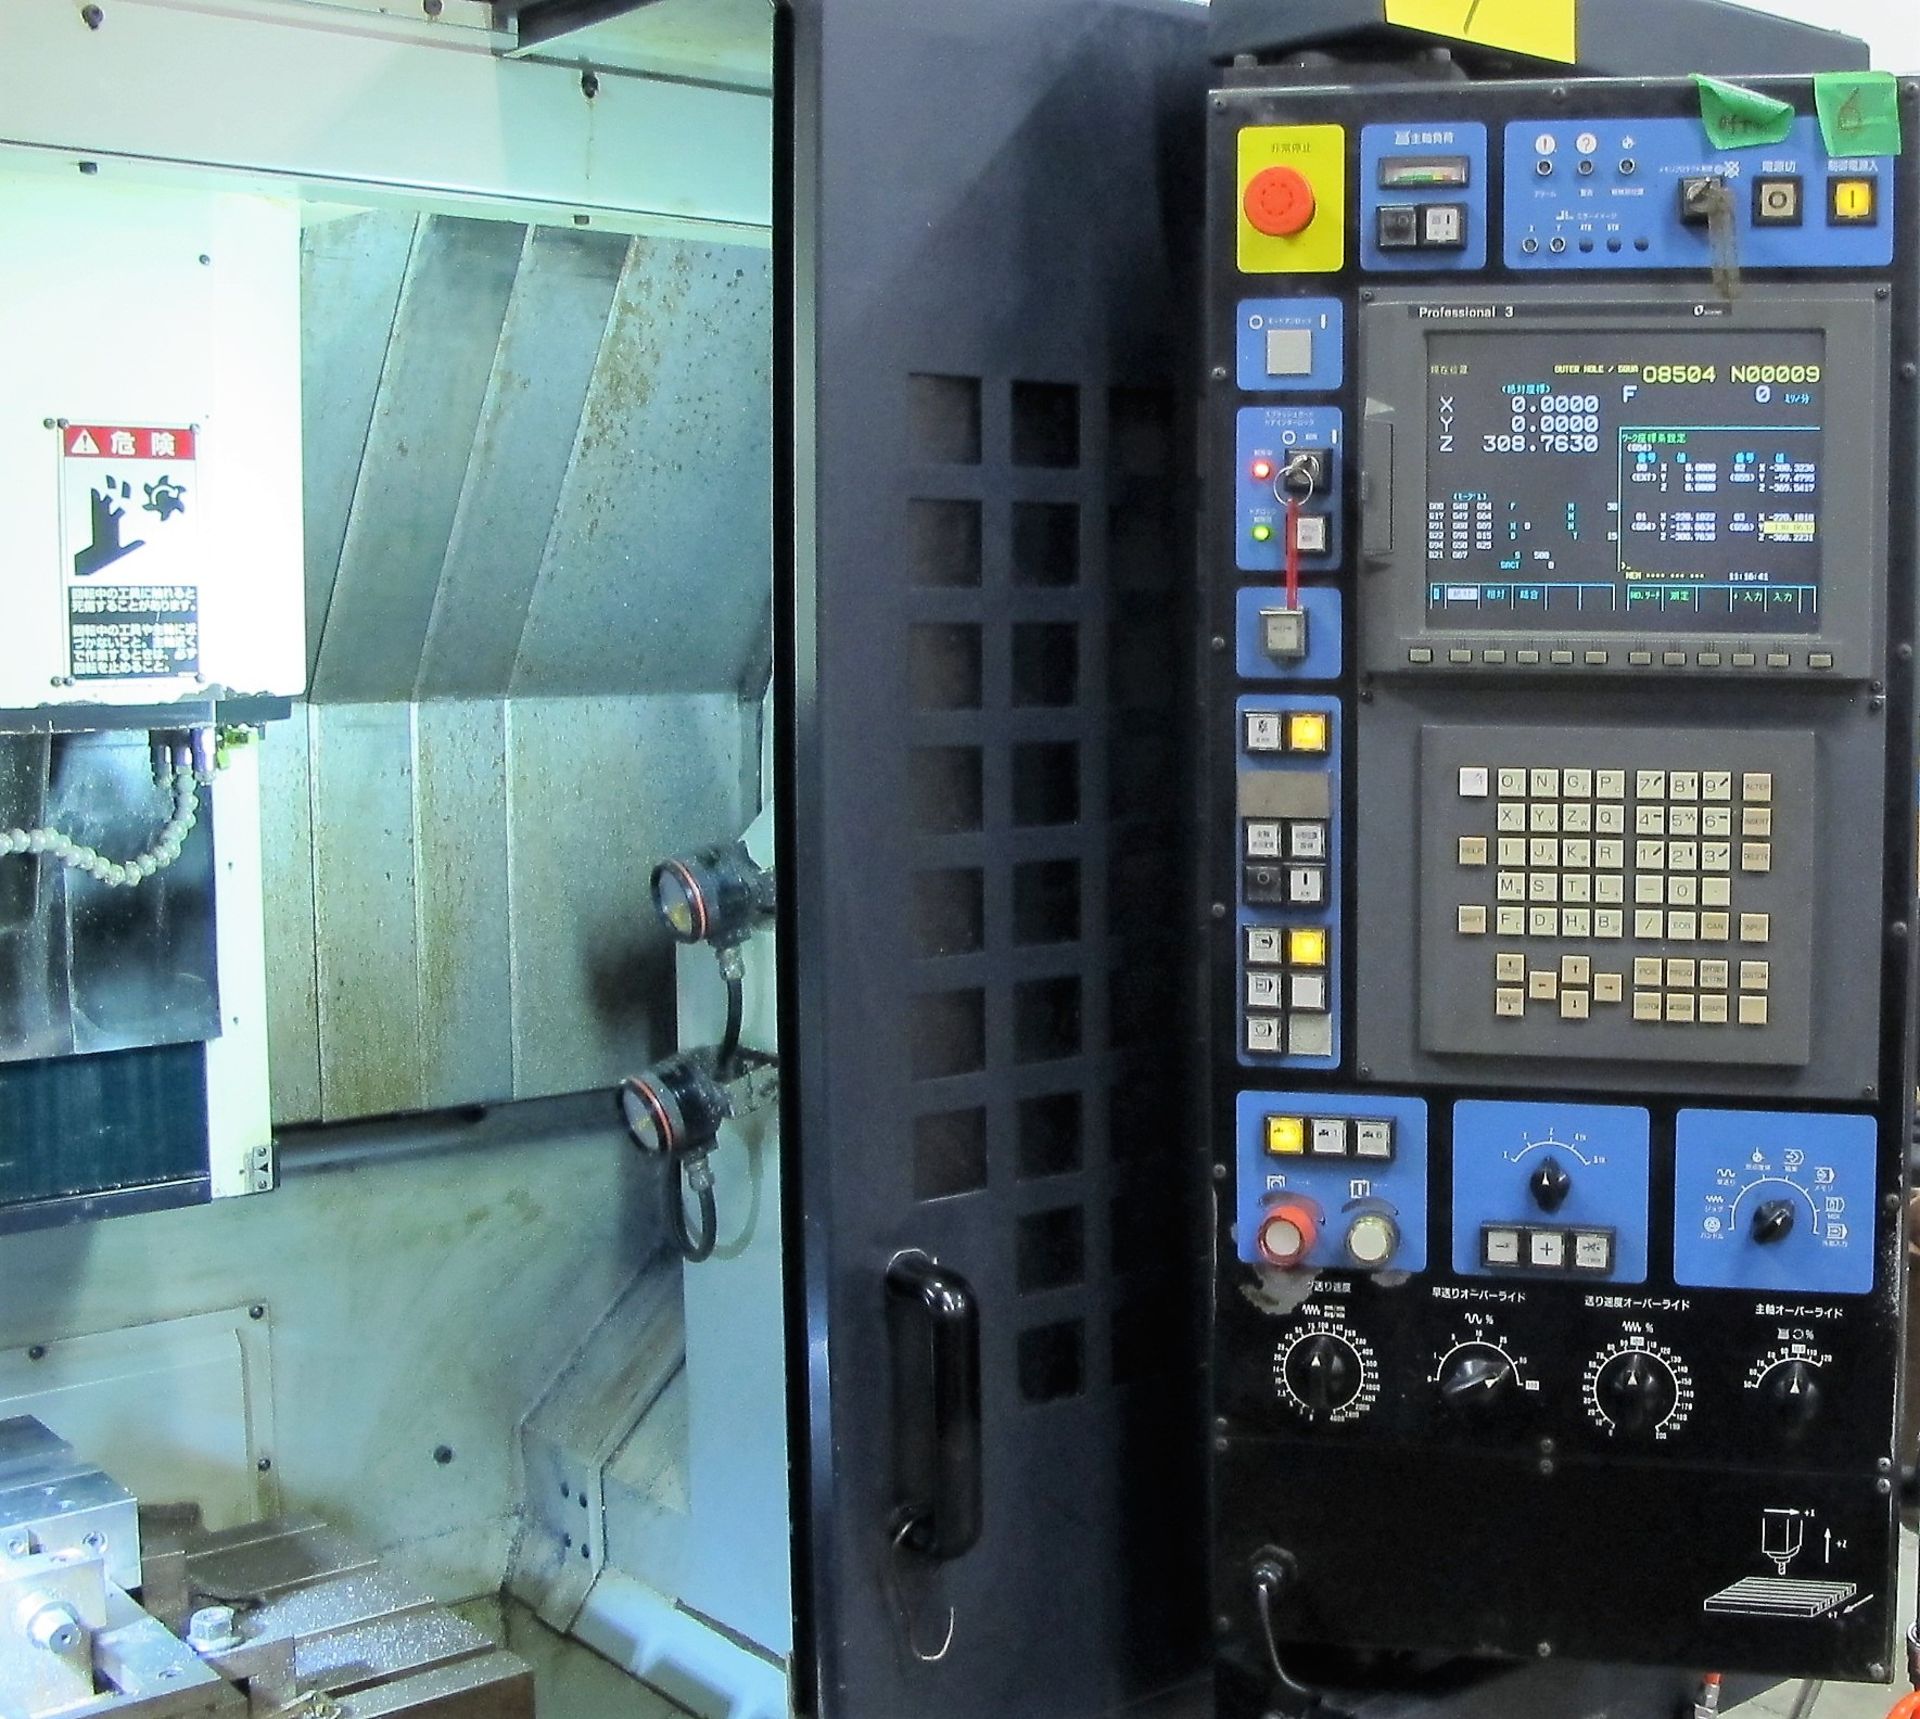 2001 MAKINO V33 HIGH SPEED CNC VERTICAL MACHINING CENTER, PROFESSIONAL 3 CONTROL, 15 ATC, 16" X 30" - Image 3 of 8